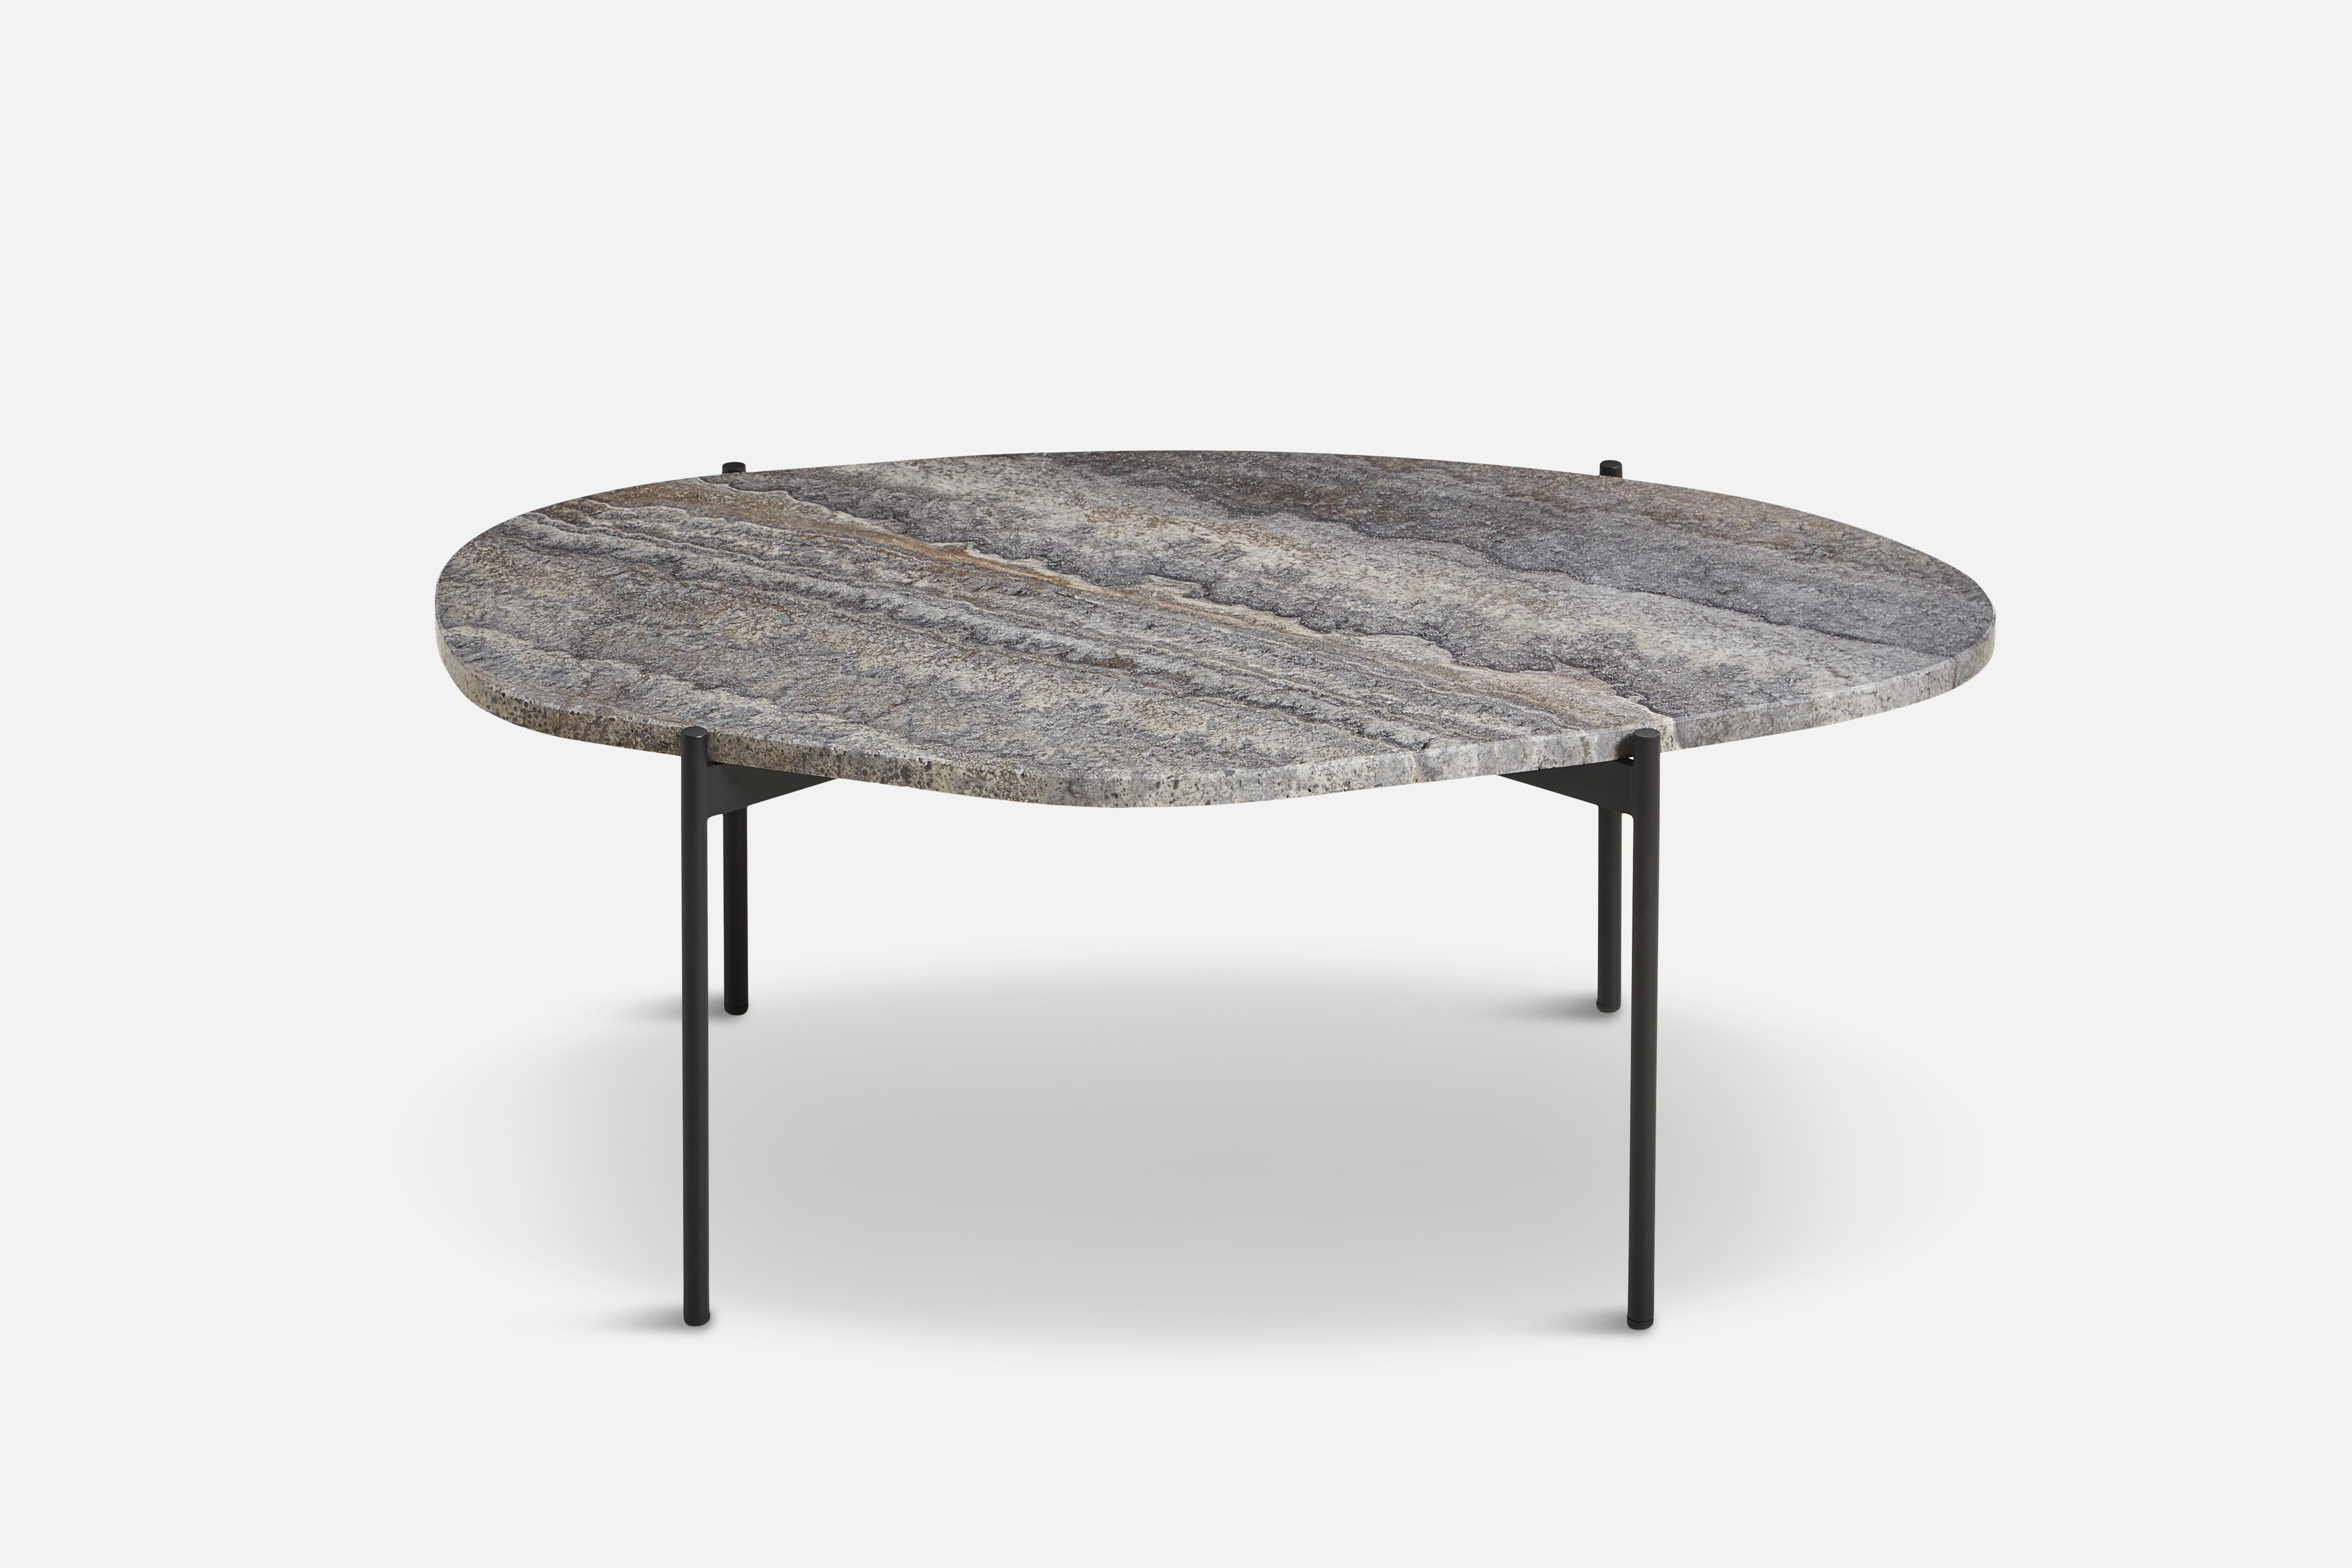 Grey Melange La Terra large occasional table by Agnes Morguet
Materials: metal, grey Melange Travertine
Dimensions: D 54 x W 95 x H 36 cm

The founders, Mia and Torben Koed, decided to put their 30 years of experience into a new project. It was